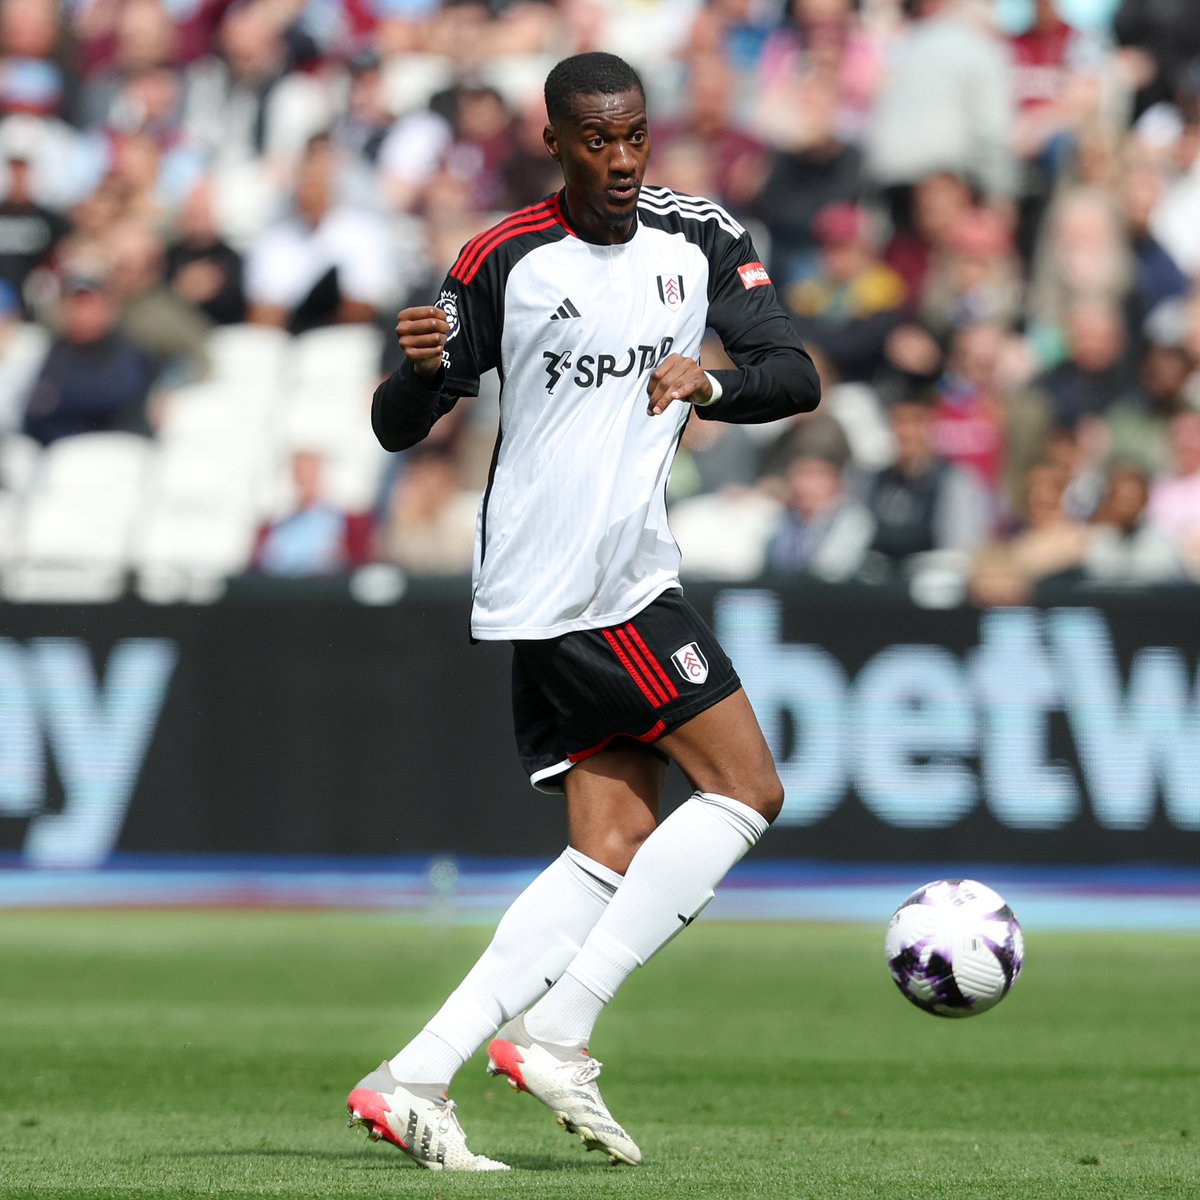 🚨 Tosin Adarabioyo is said to be pleasantly aware of how Newcastle see his prospective role at St James’ Park and, according to @MailSport, he is leaning towards a move to Tyneside - especially given the “prospect of working under a coach like Eddie Howe.” 👀 #NUFC #FFC #PL…